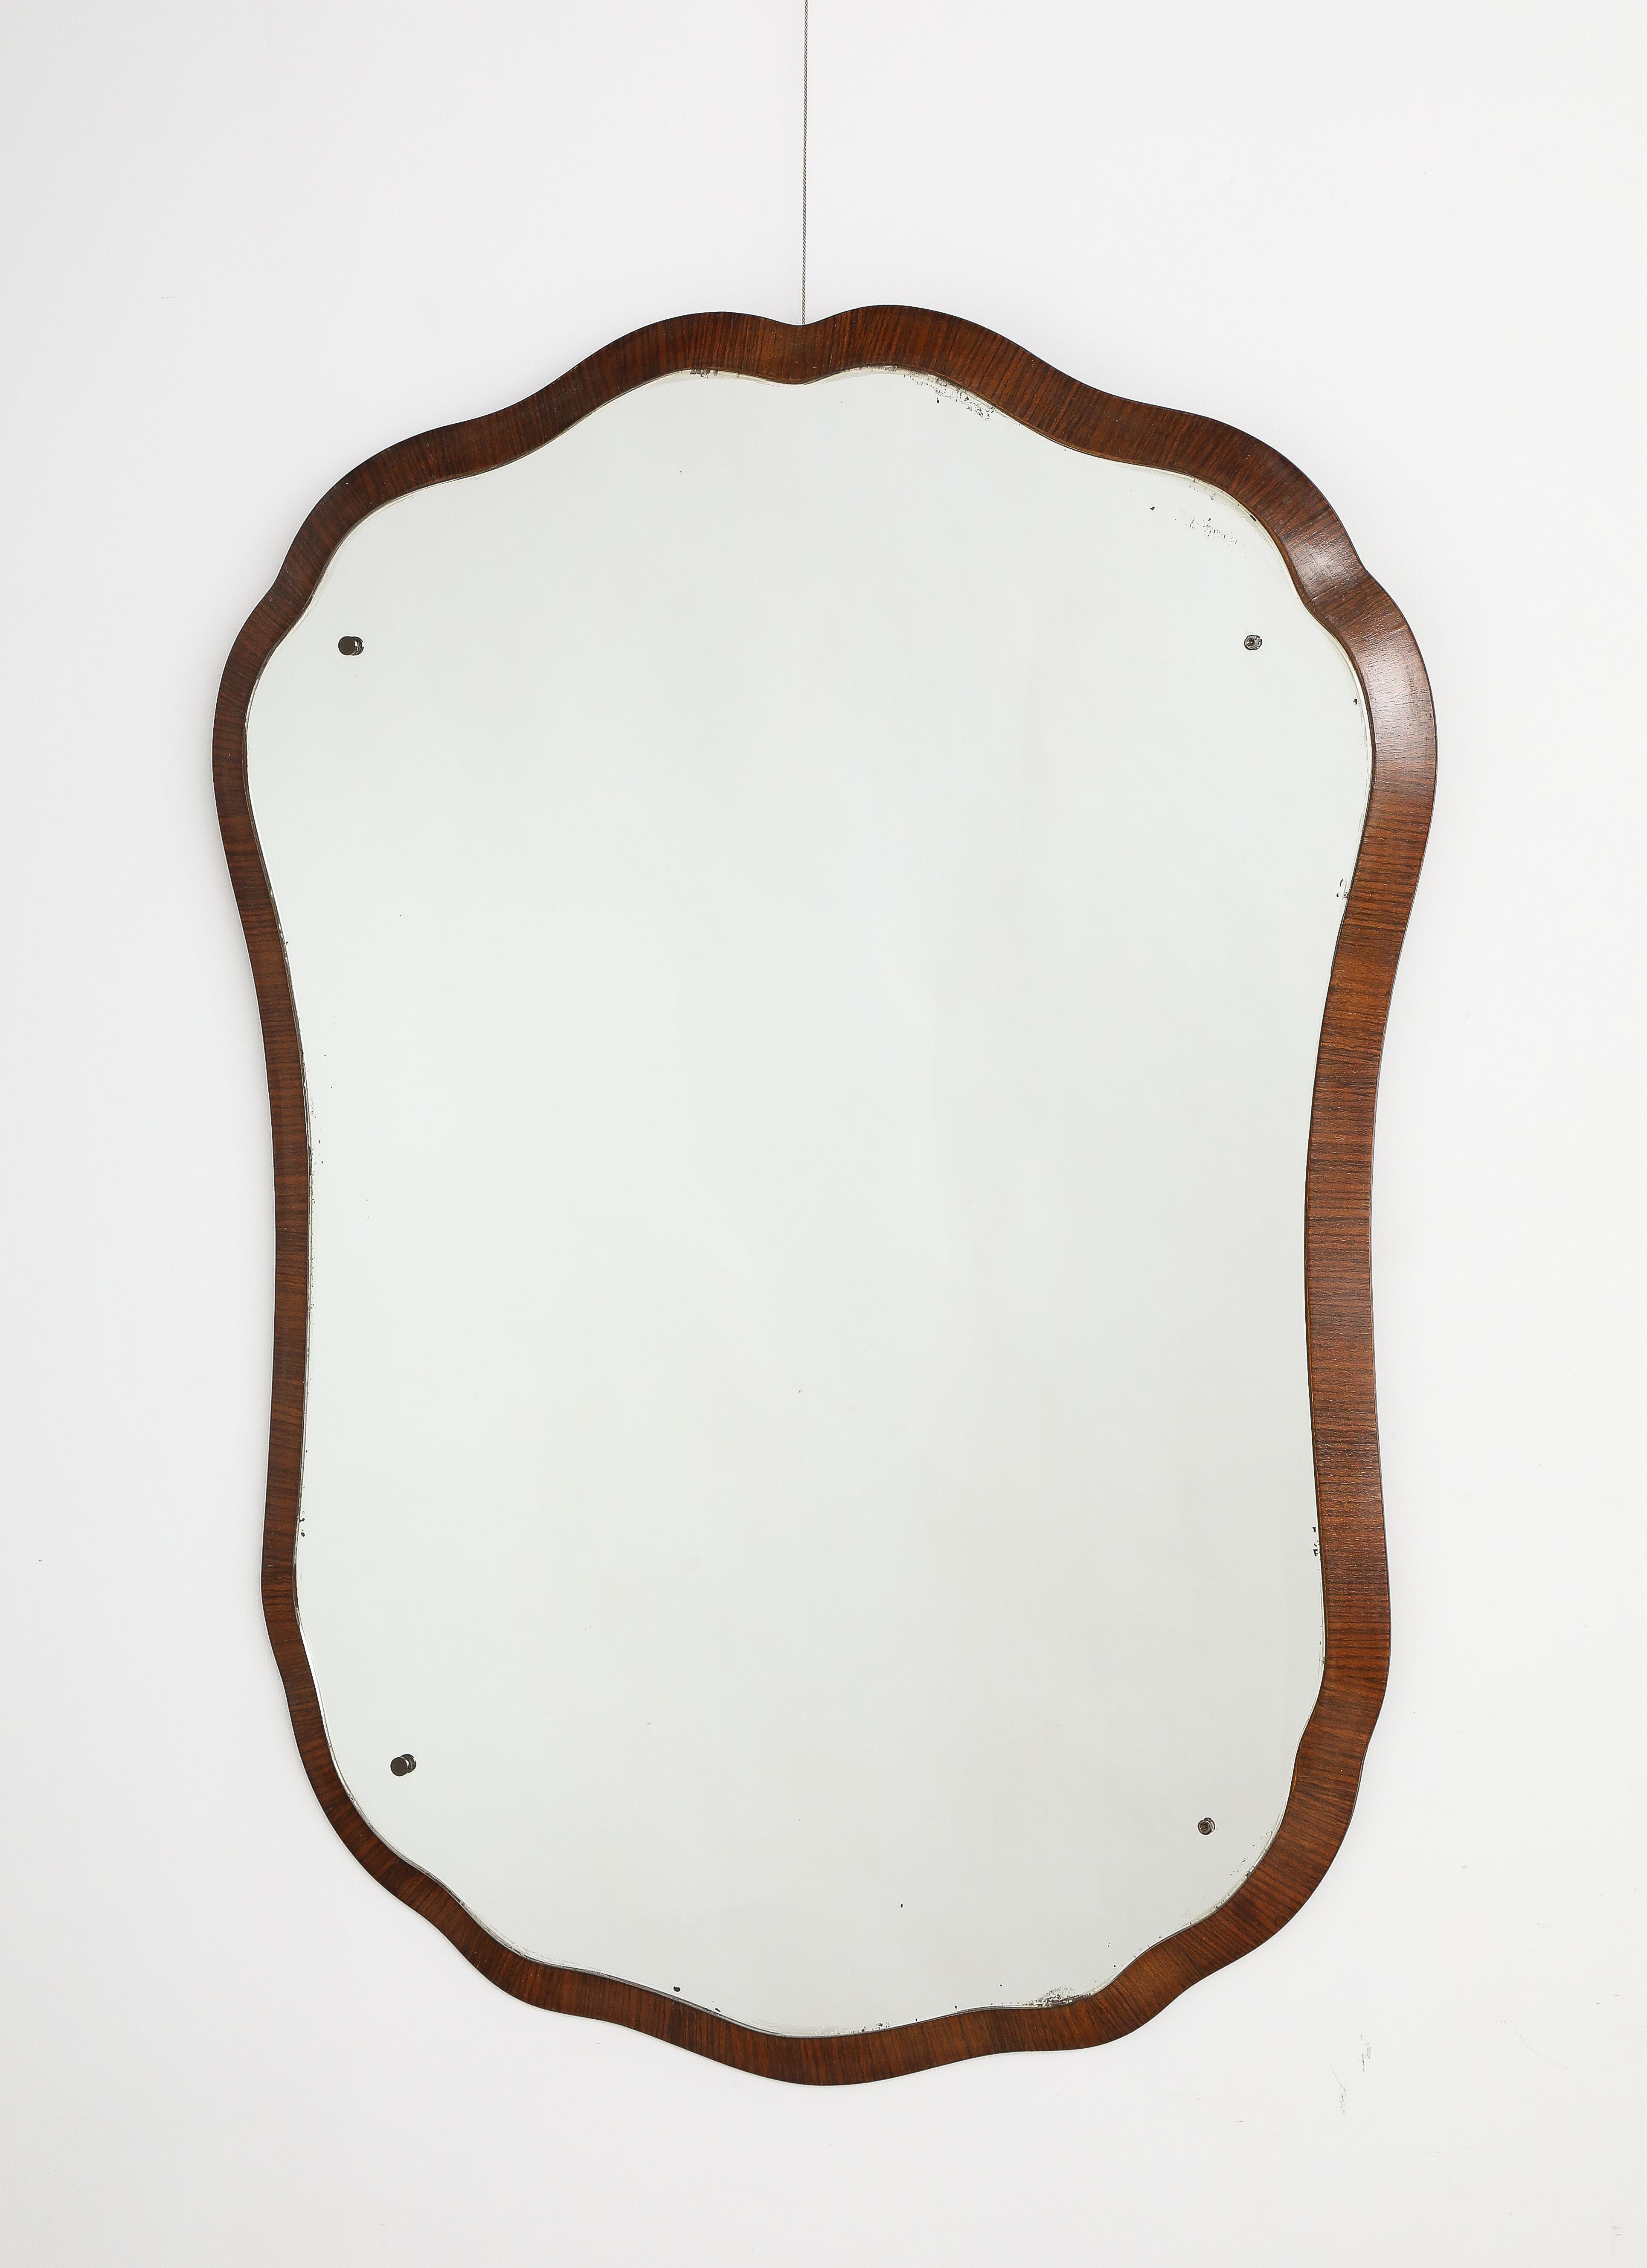 A highly unique and elegant grand scale Italian palisander wood cartouche shaped mirror.  The palisander wood molded frame supports the original glass plate which follows the shape of the outer wood frame.  A stunning piece with graceful form